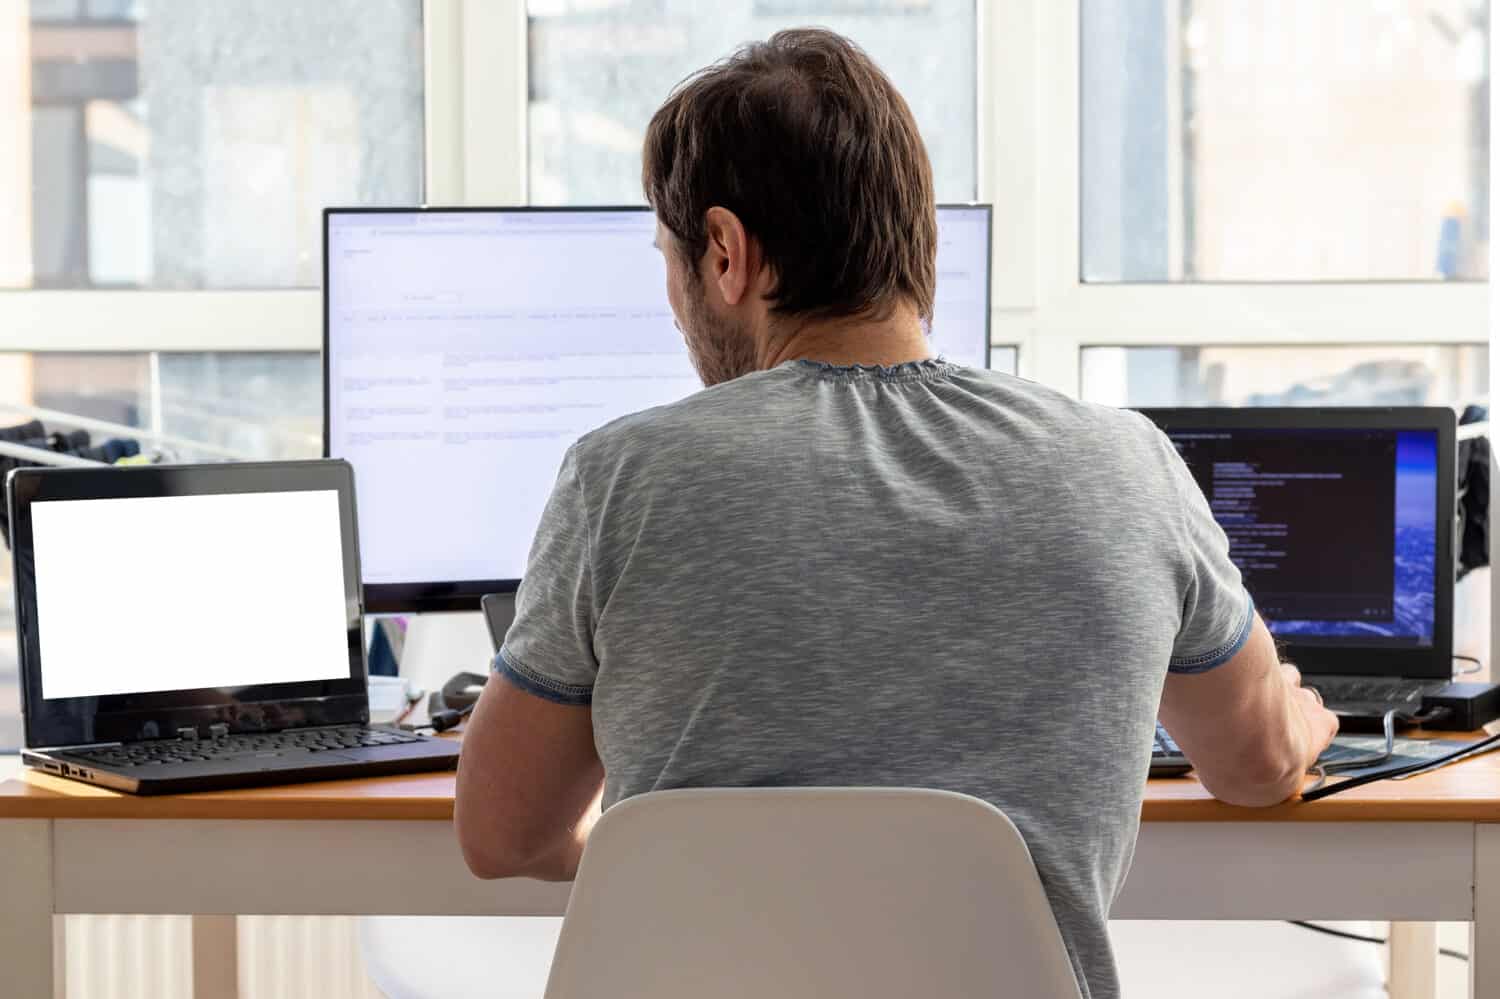 A man in a gray t-shirt is sitting at a workplace with two laptops and a monitor near the window.